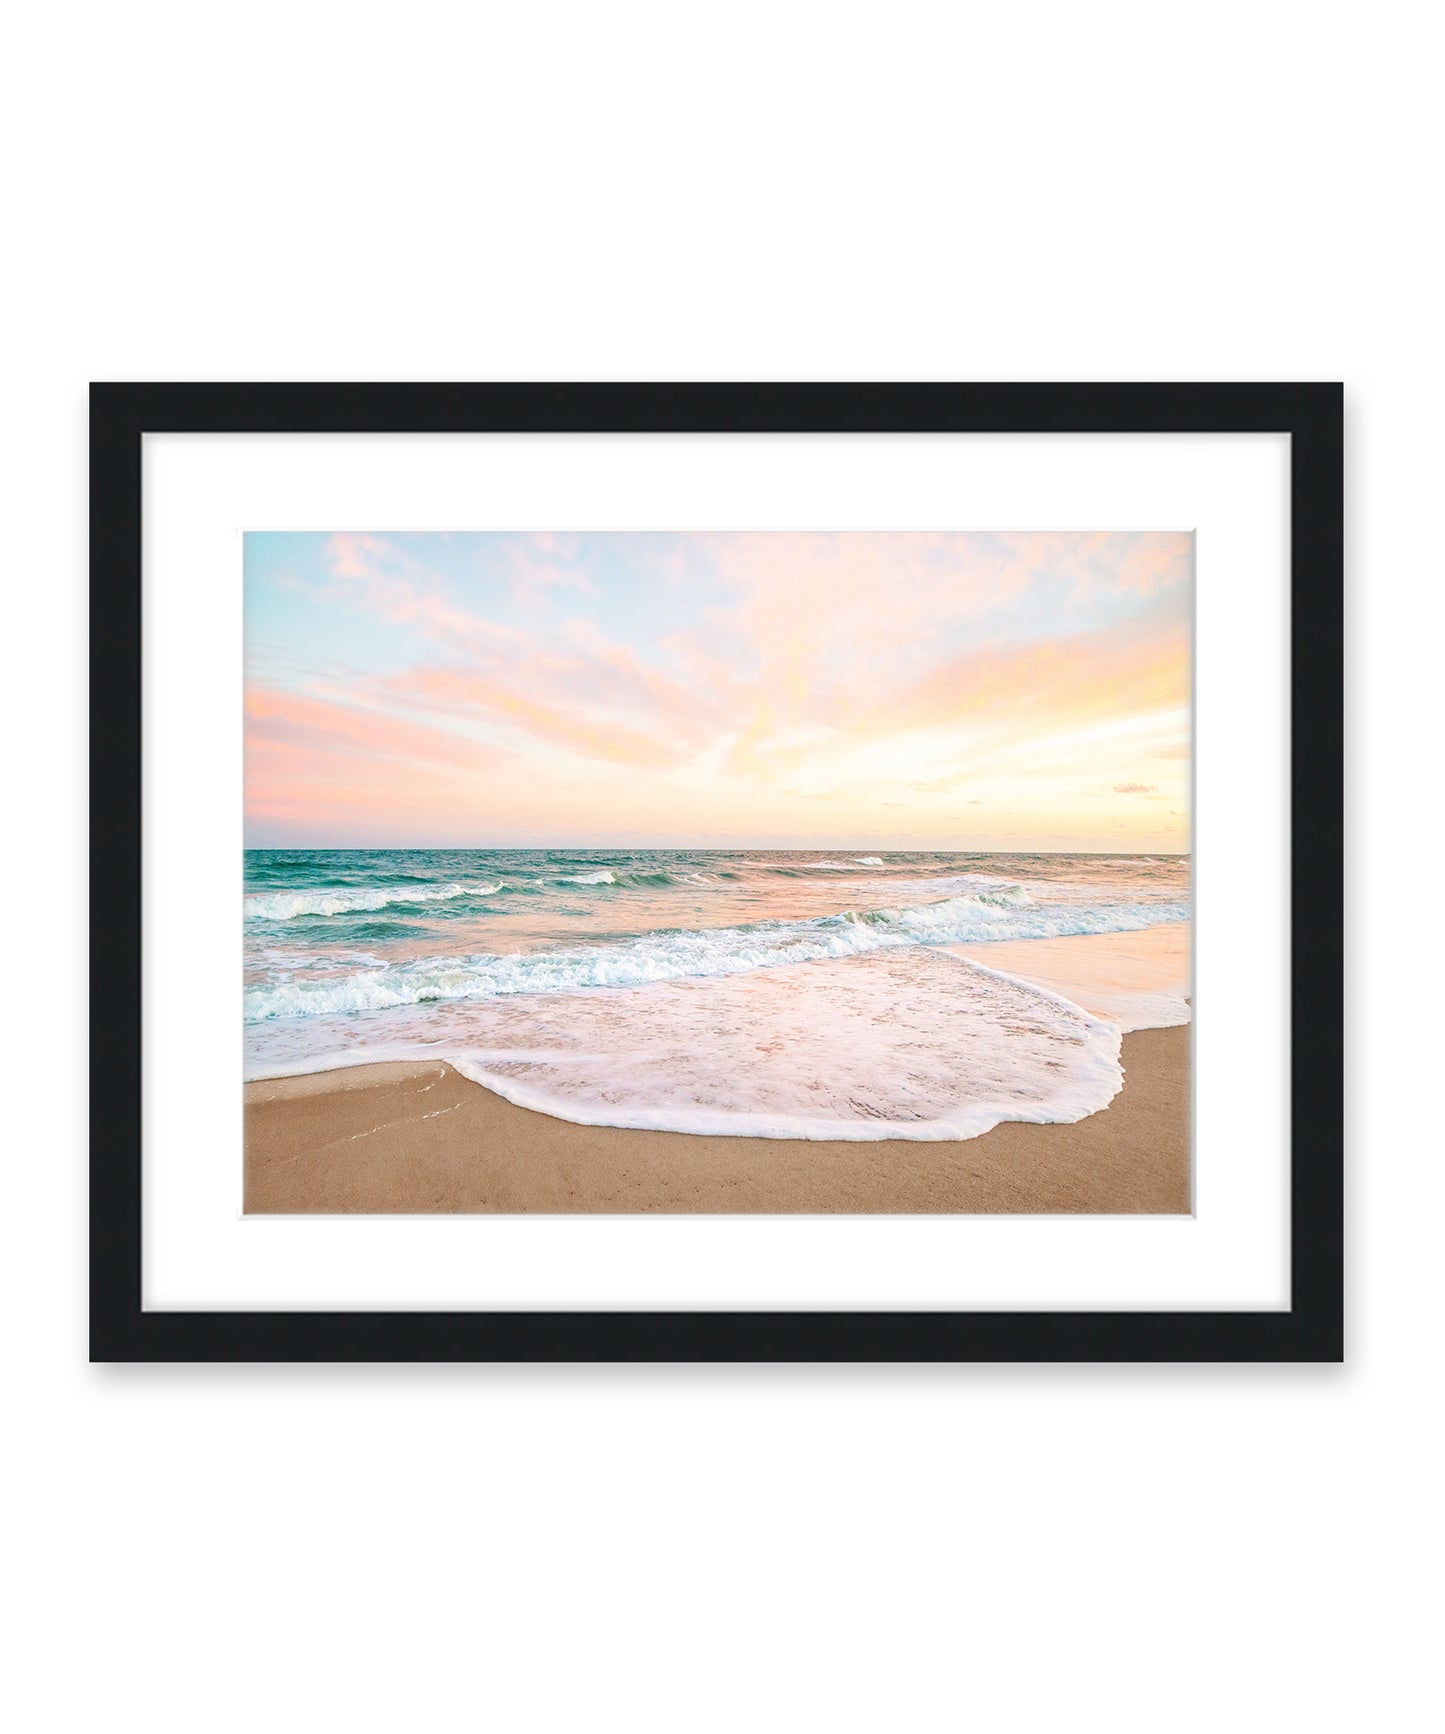 Pastel Colorful Sunset Wrightsville Beach Photograph, Black Frame by Wright and Roam